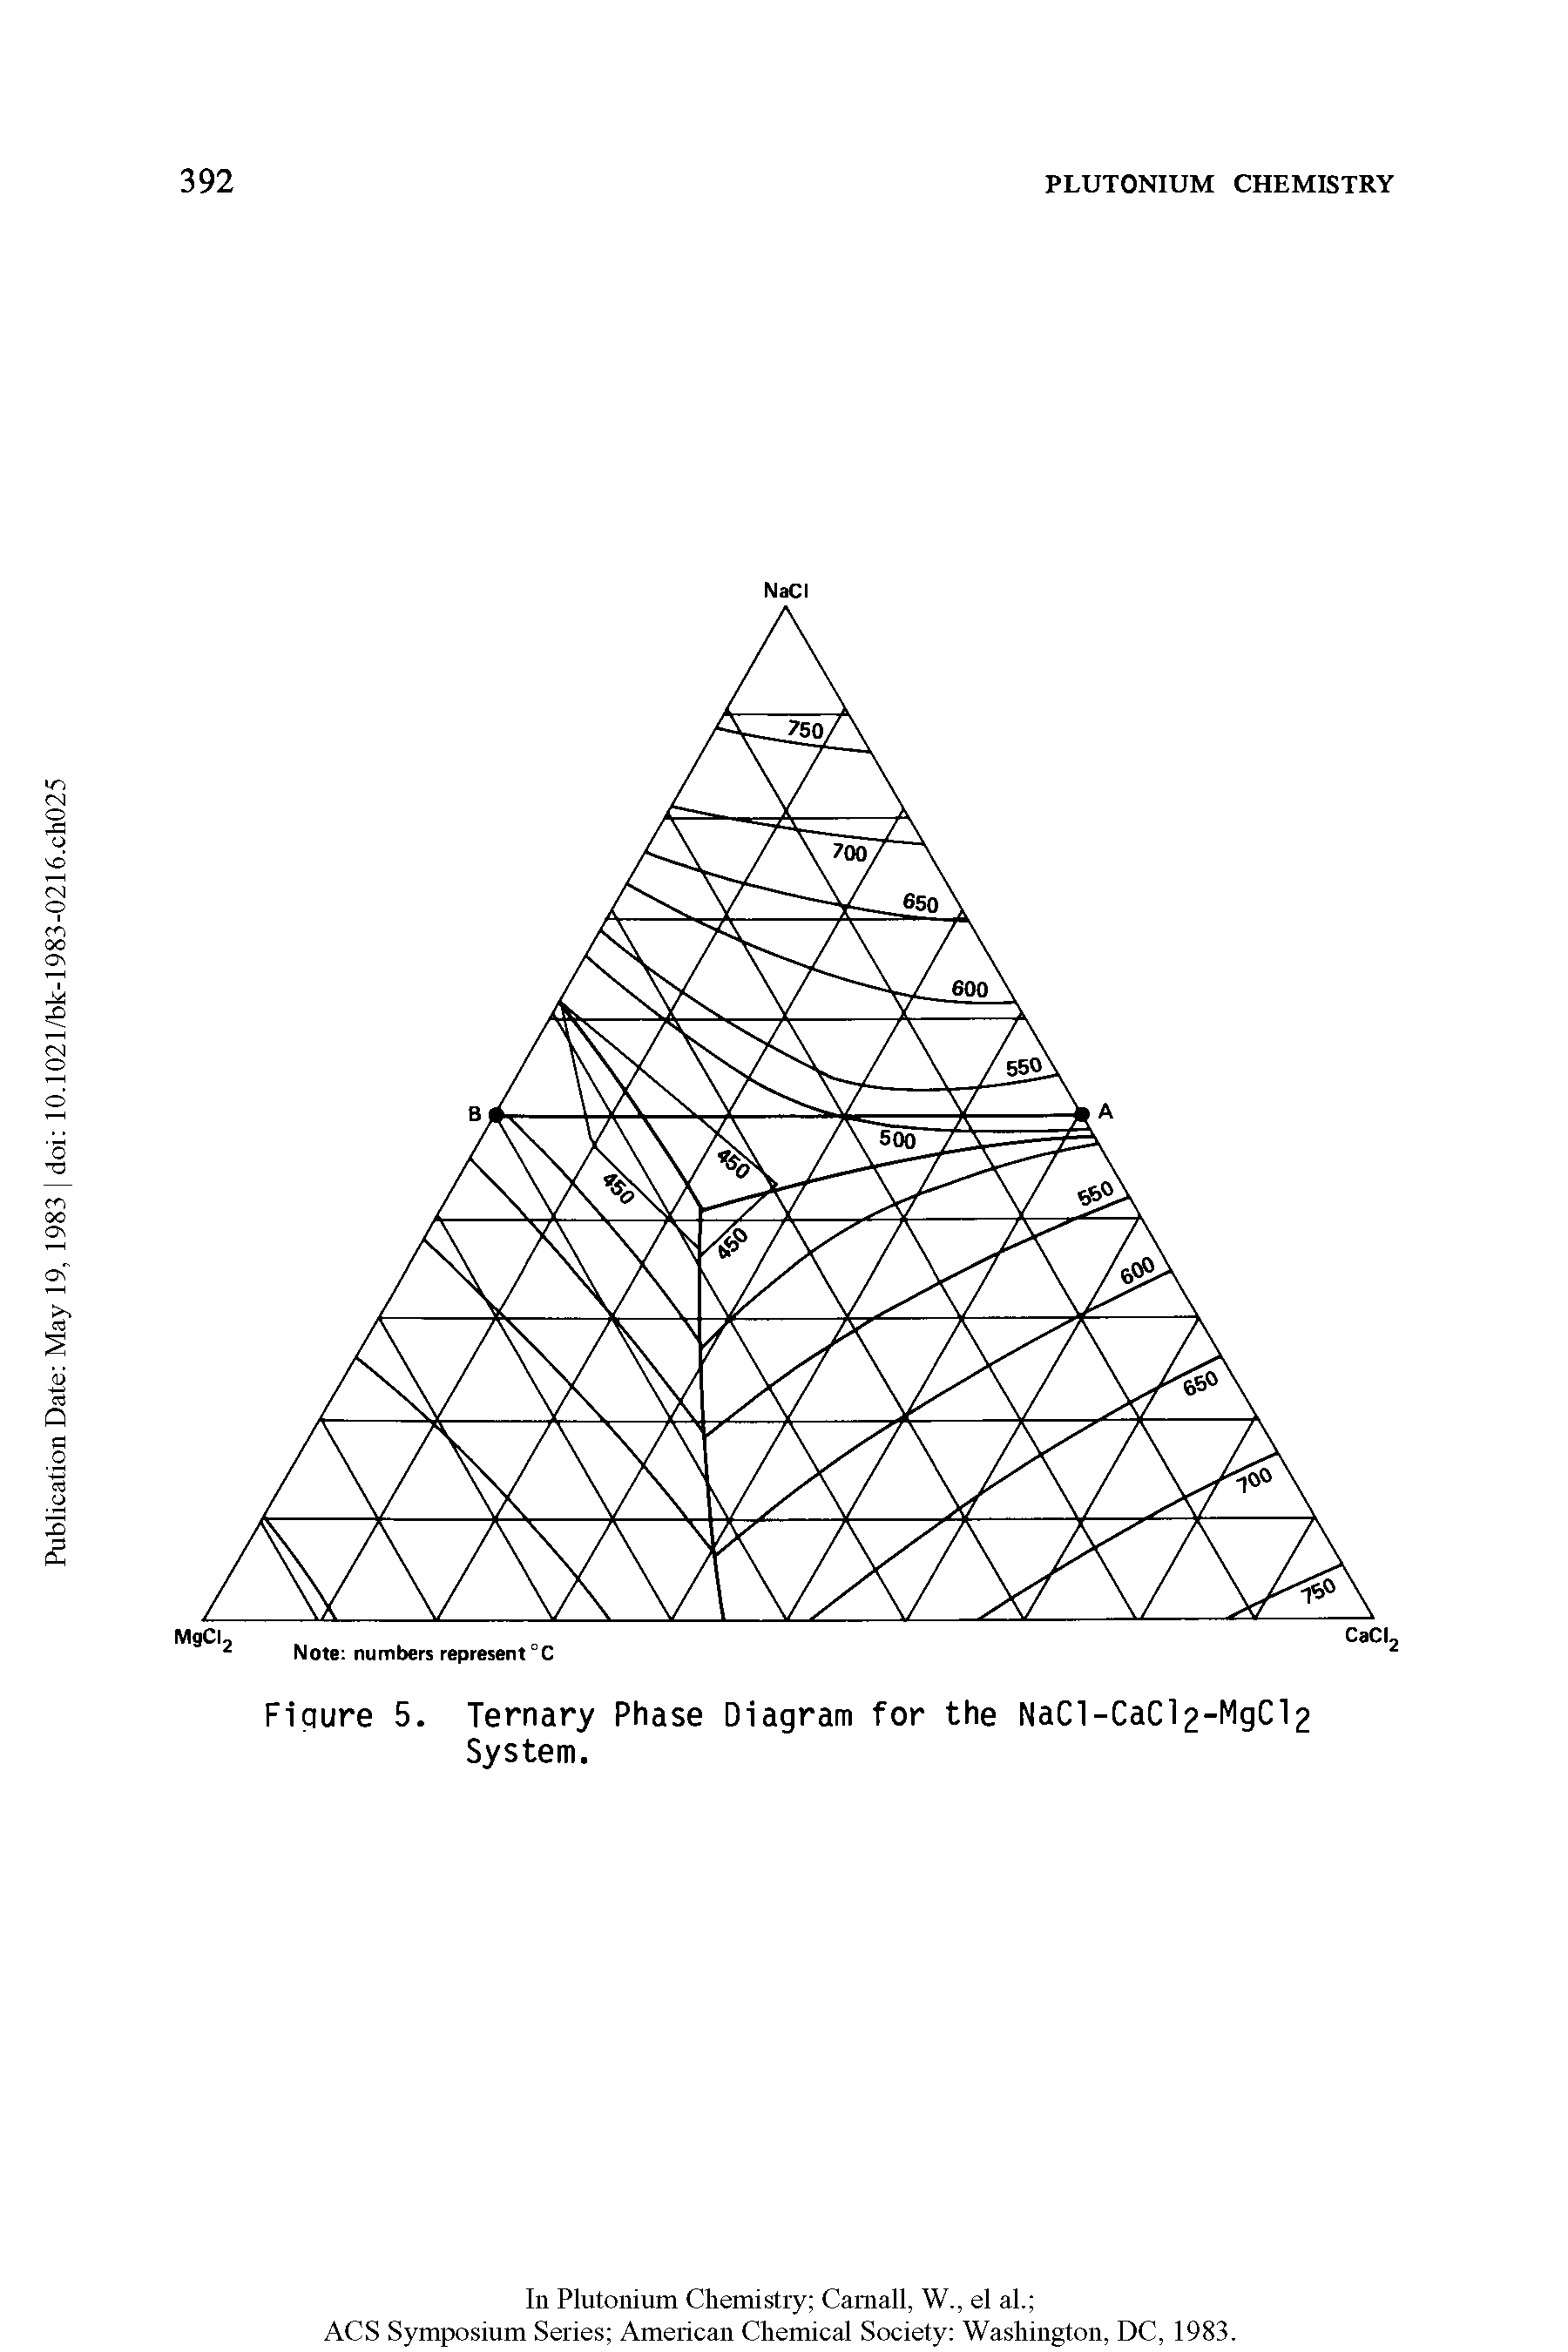 Figure 5. Ternary Phase Diagram for the NaCl-CaCl2-MgCl2 System.